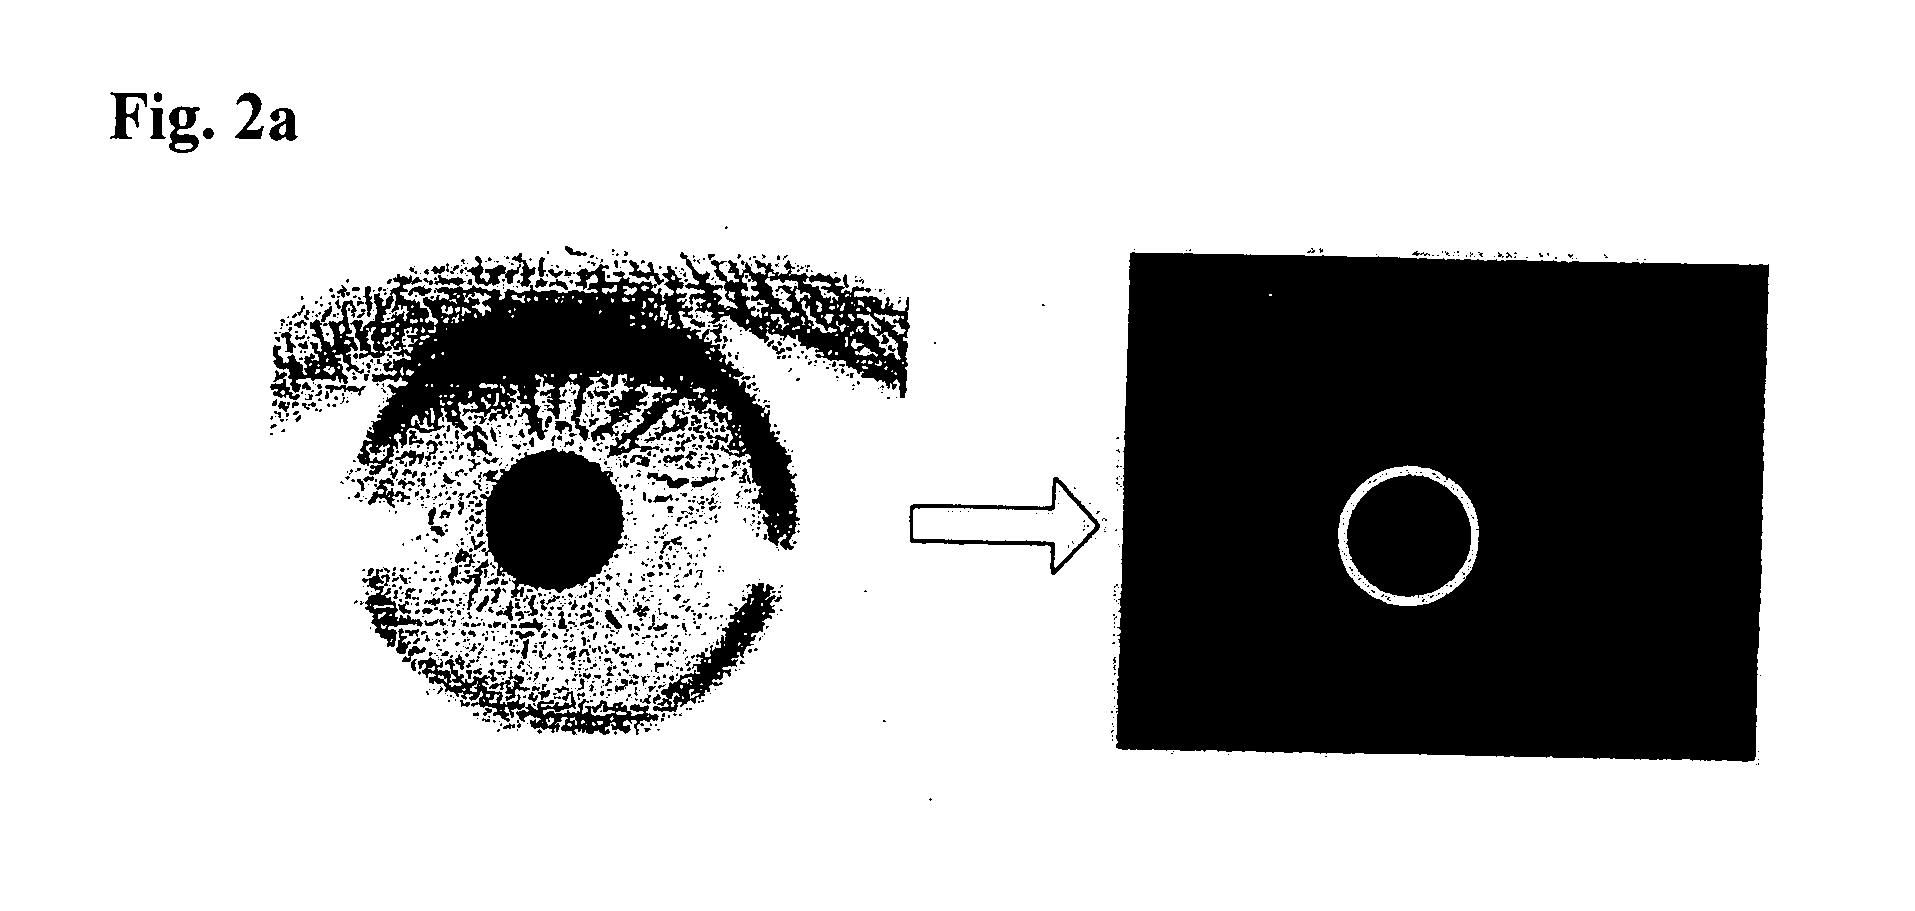 Iris image data processing for use with iris recognition system